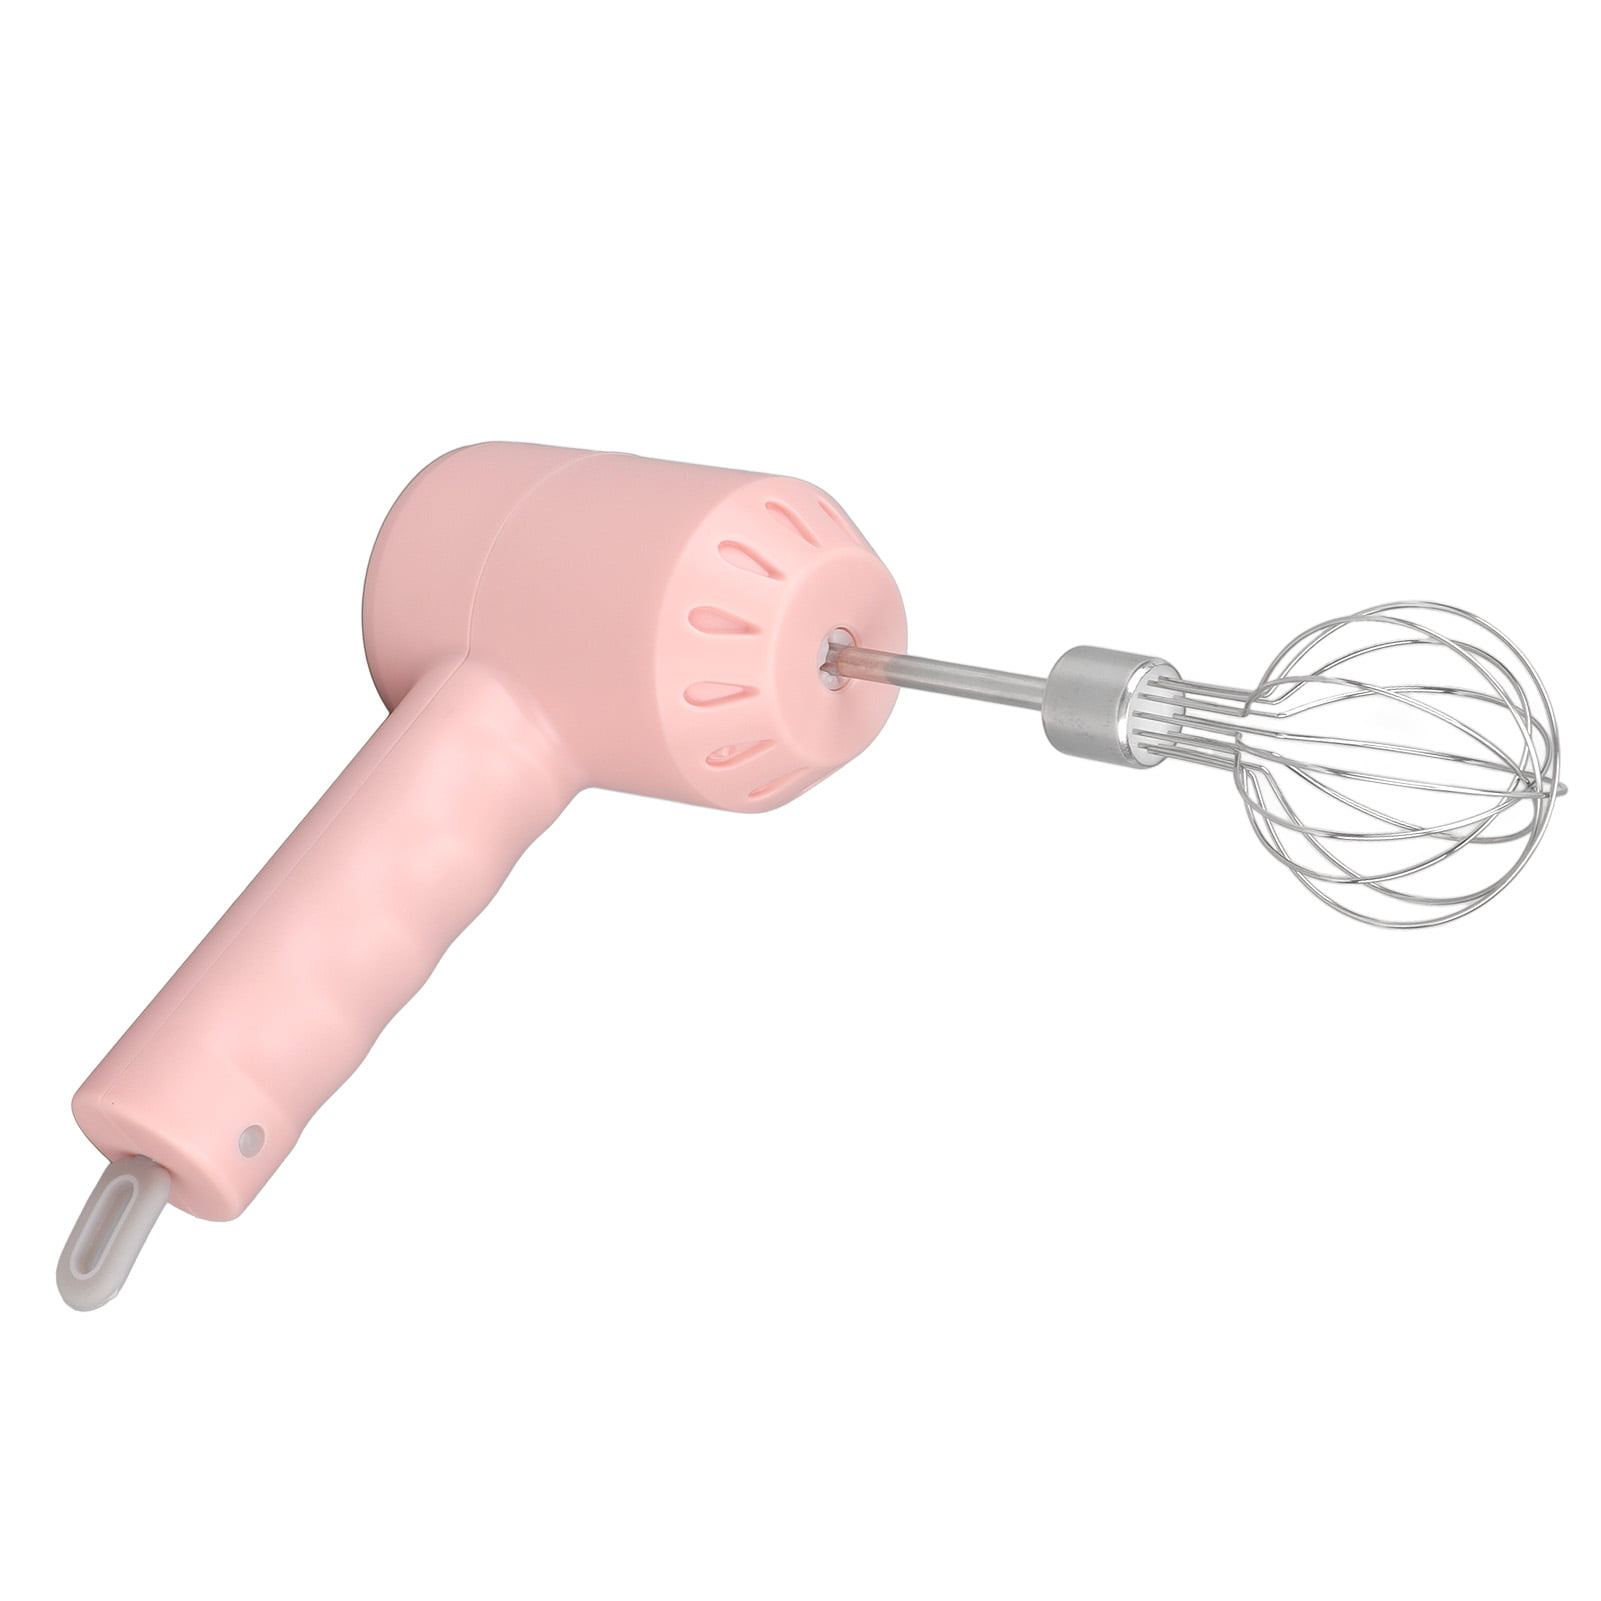 USB Rechargeable Electric Hand Mixer, Cordless Eggbeater Milk Whipper USA